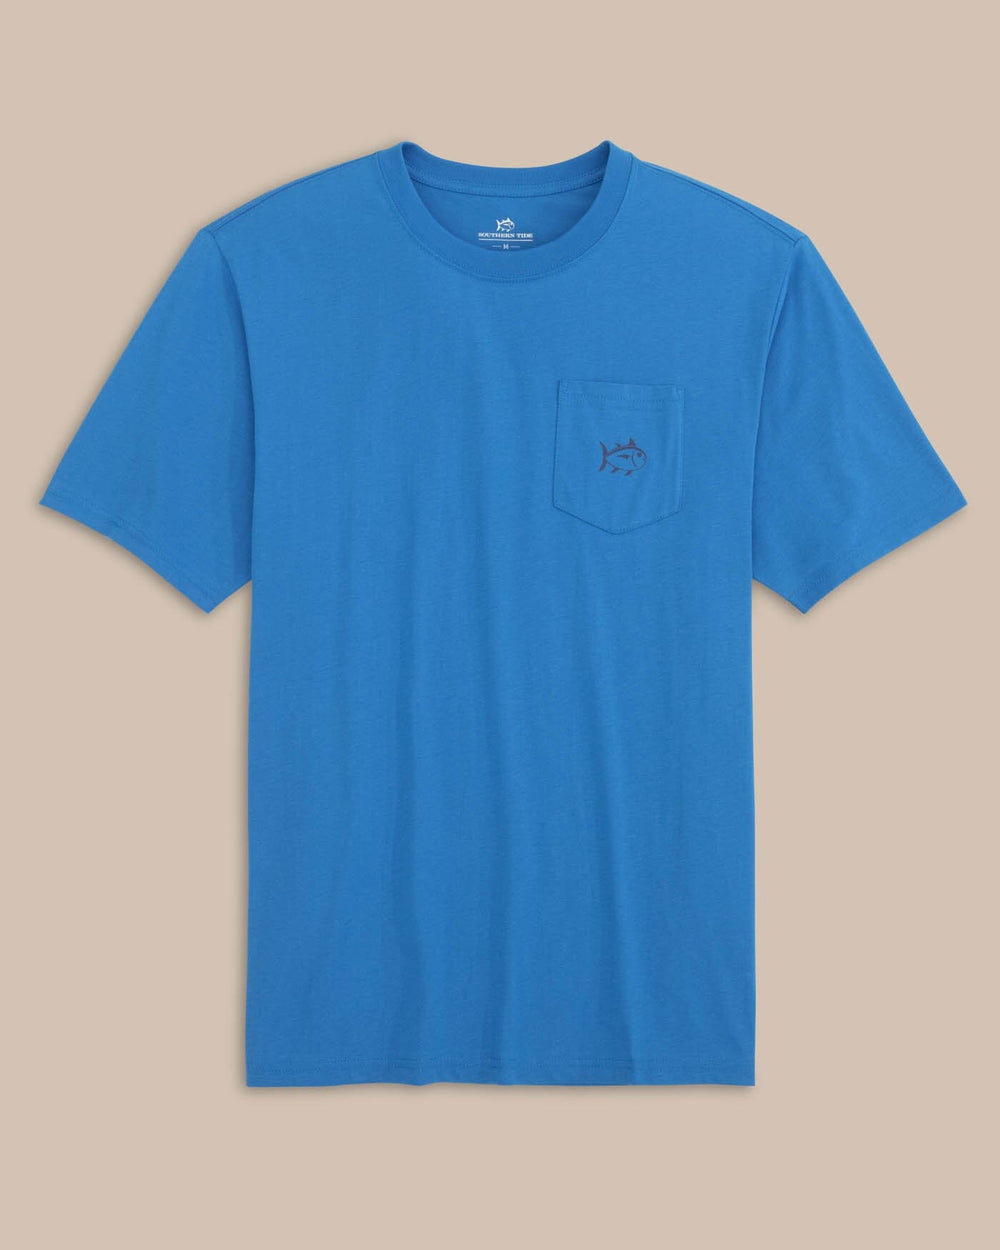 The front view of the Southern Tide ST Stack Short Sleeve T-Shirt by Southern Tide - Mediterranean Blue